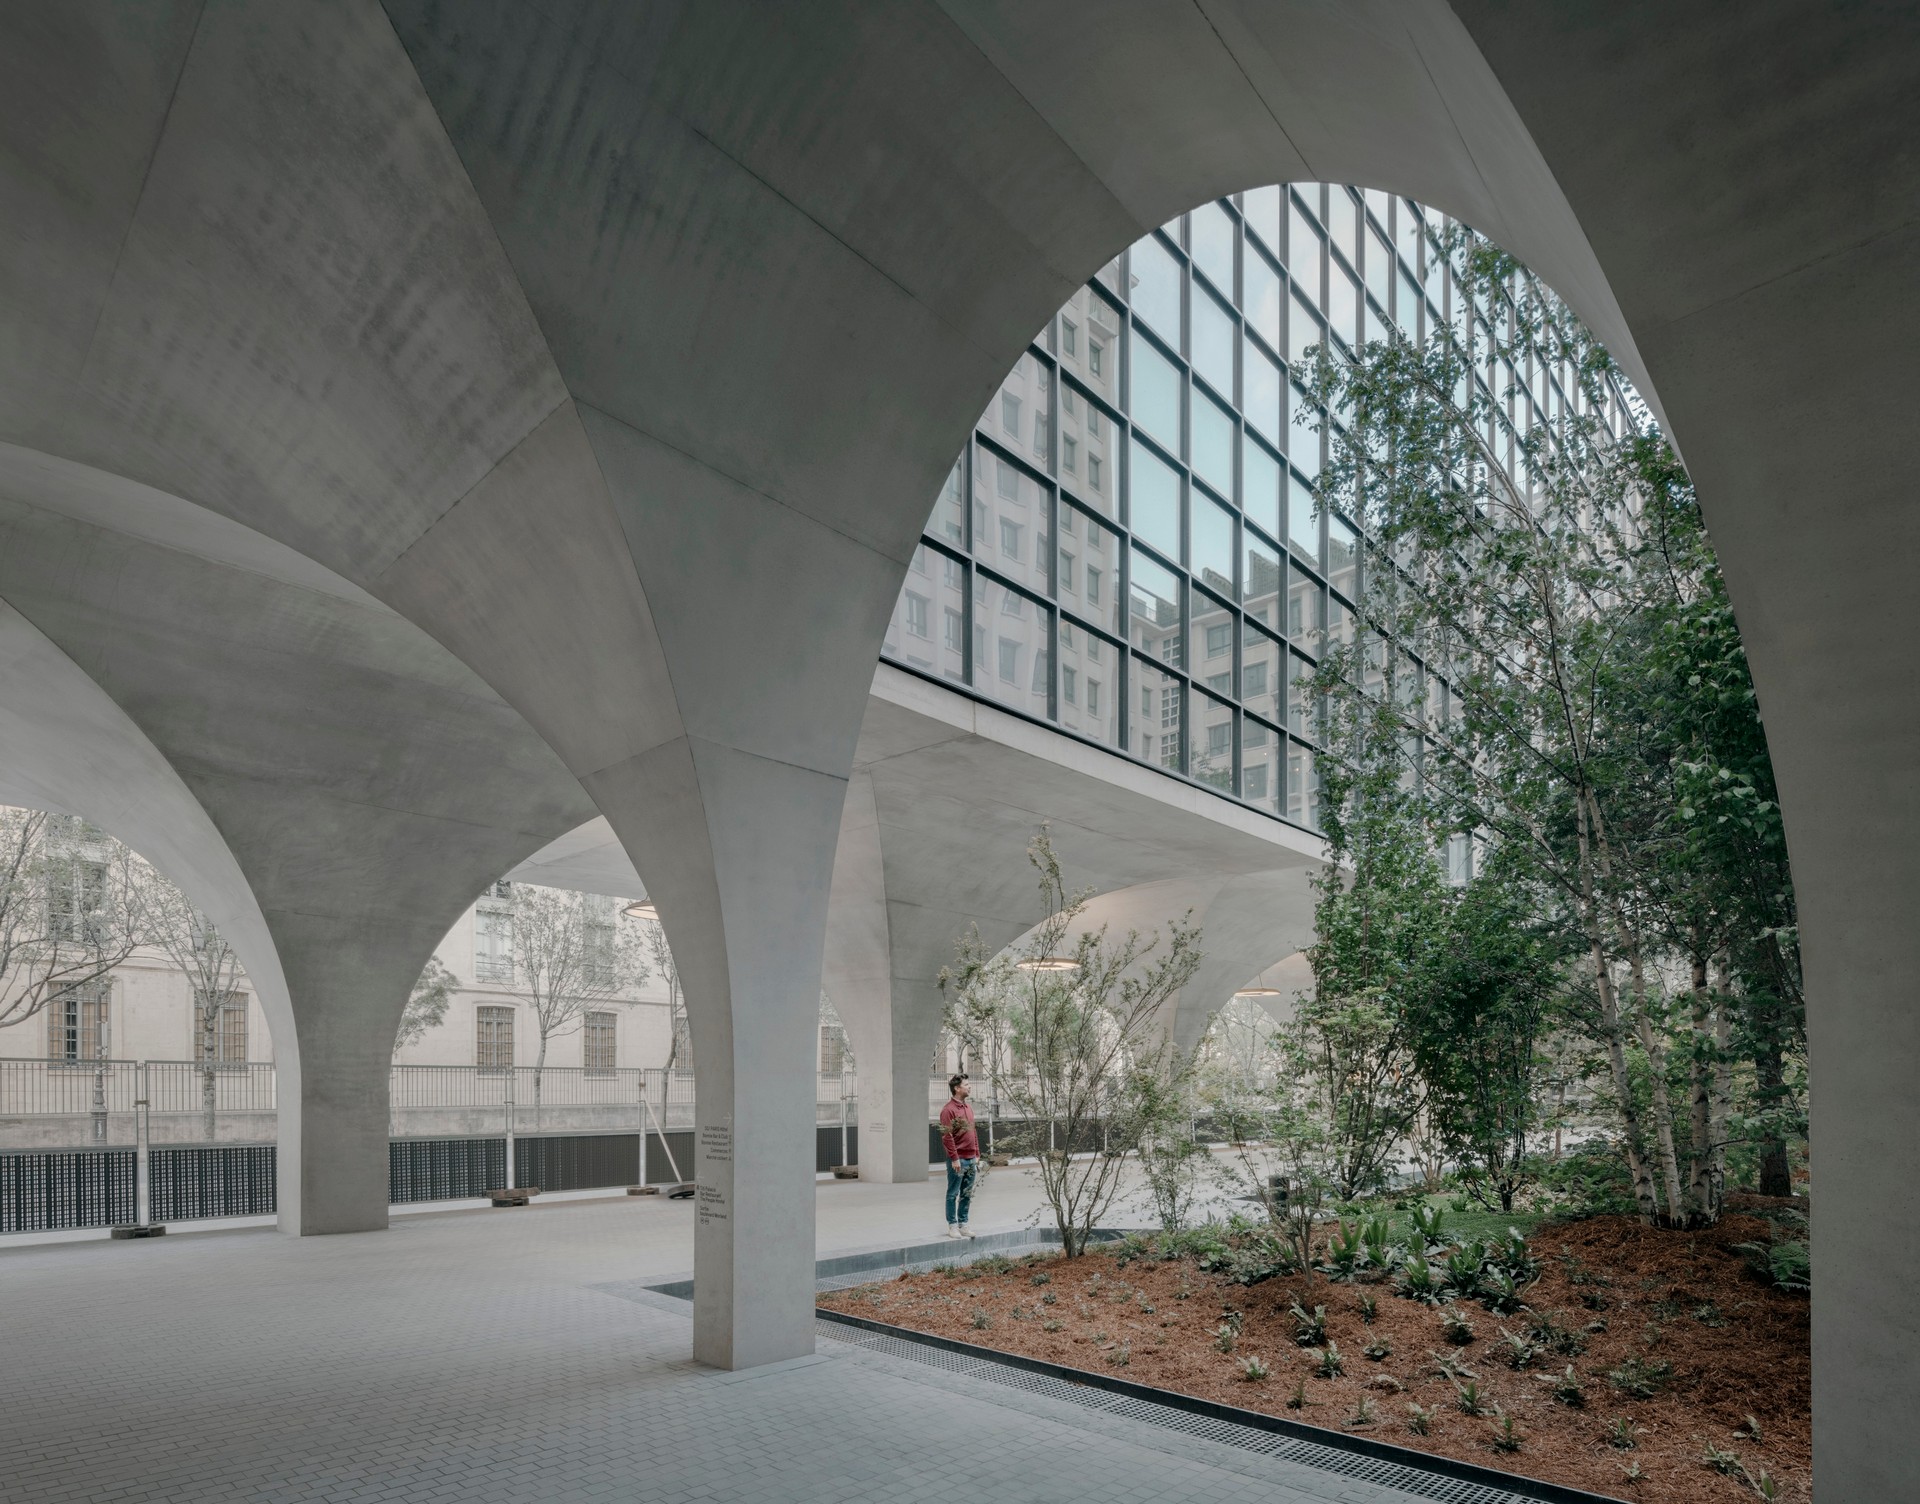 David Chipperfield Architects completed Morland Mixité Capitale in